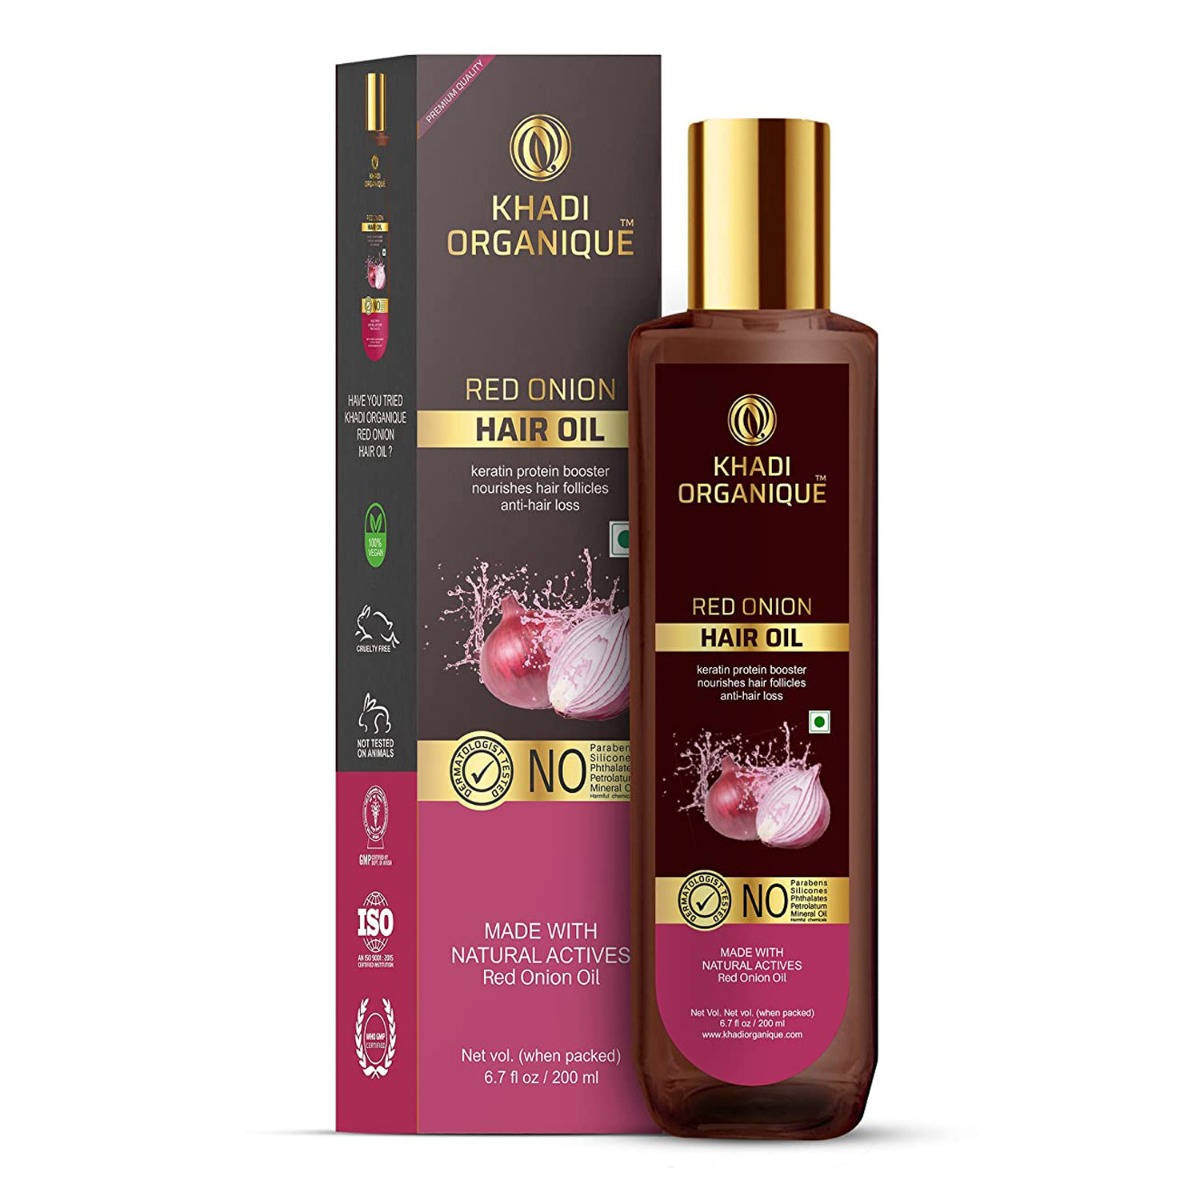 Khadi Organique Red Onion Hair Oil With Keratin Protein Booster, 200ml